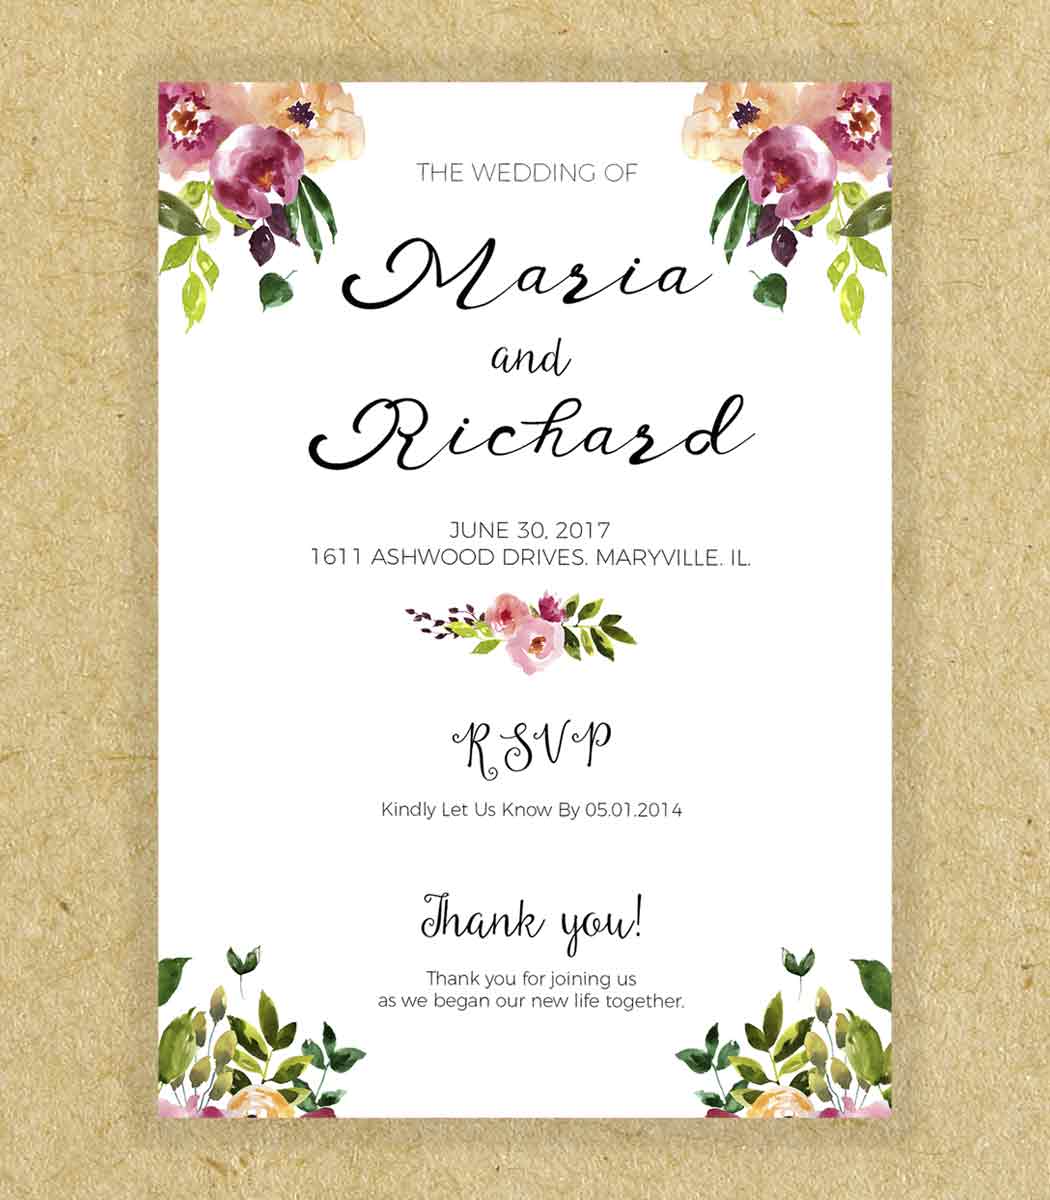 Marriage Invitation Card For Friends Online - Best Design Idea